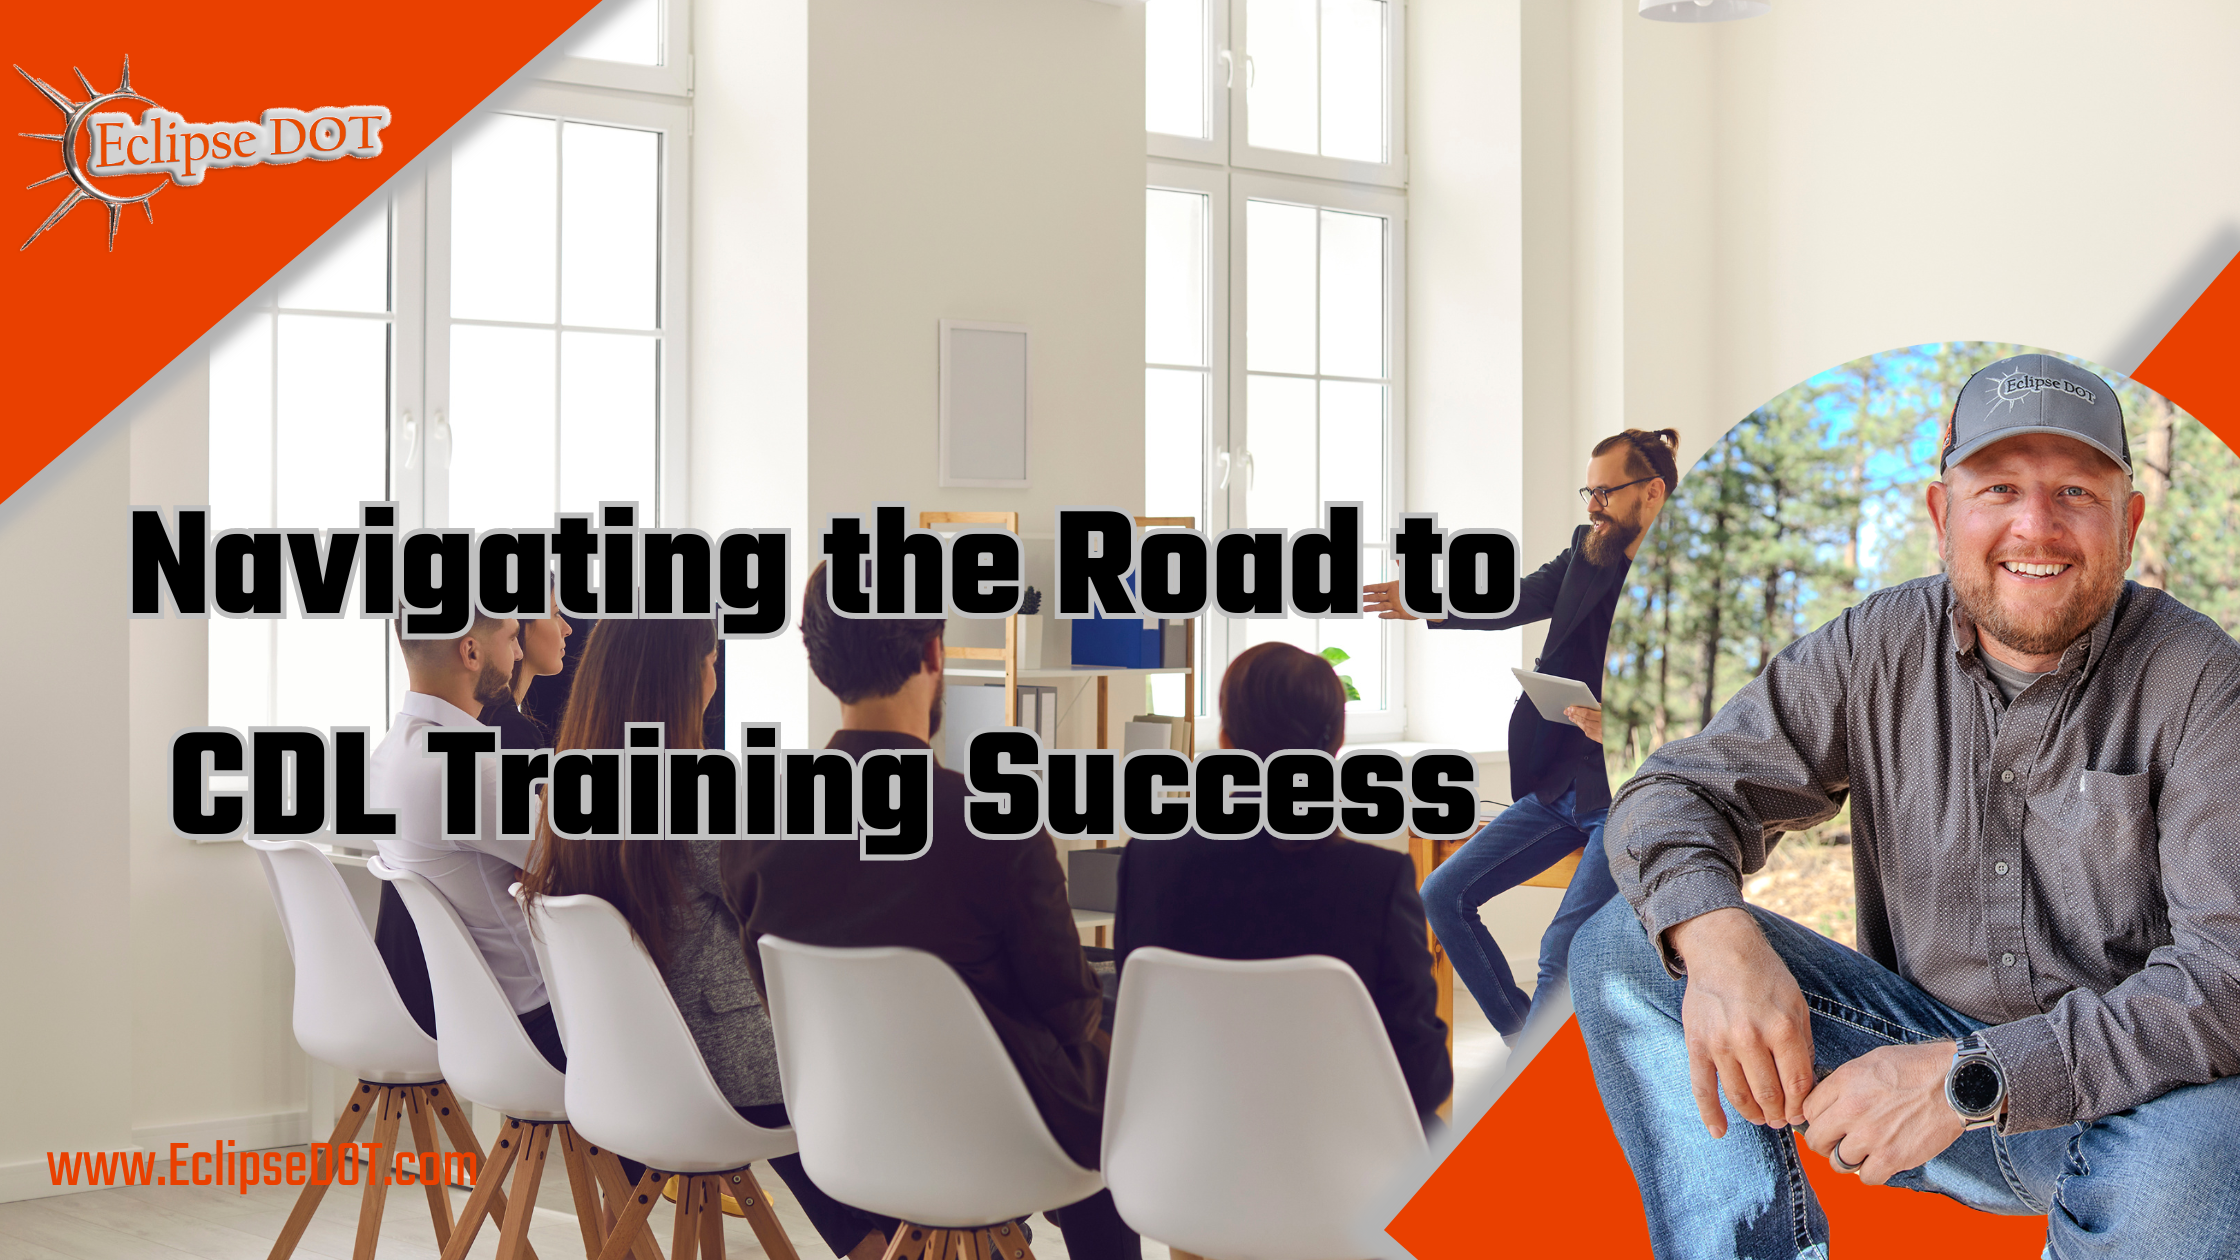 Navigating the Road to CDL Training Success